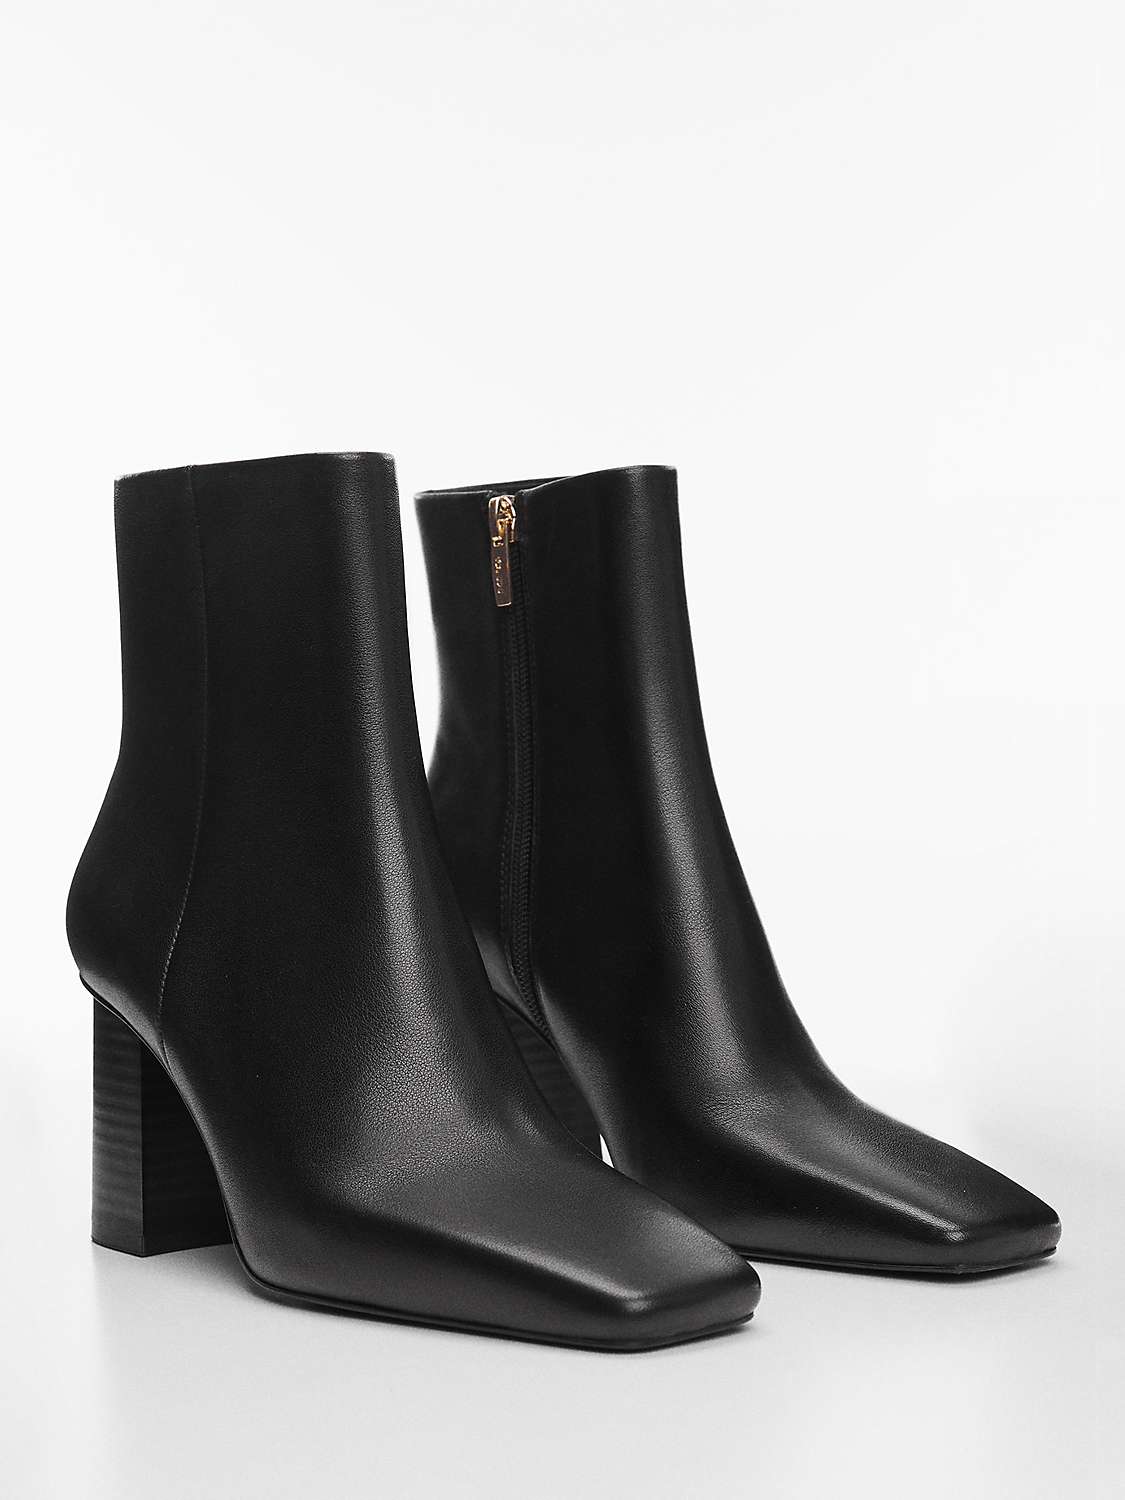 Buy Mango Guindo Square Toe Leather Ankle Boots, Black Online at johnlewis.com